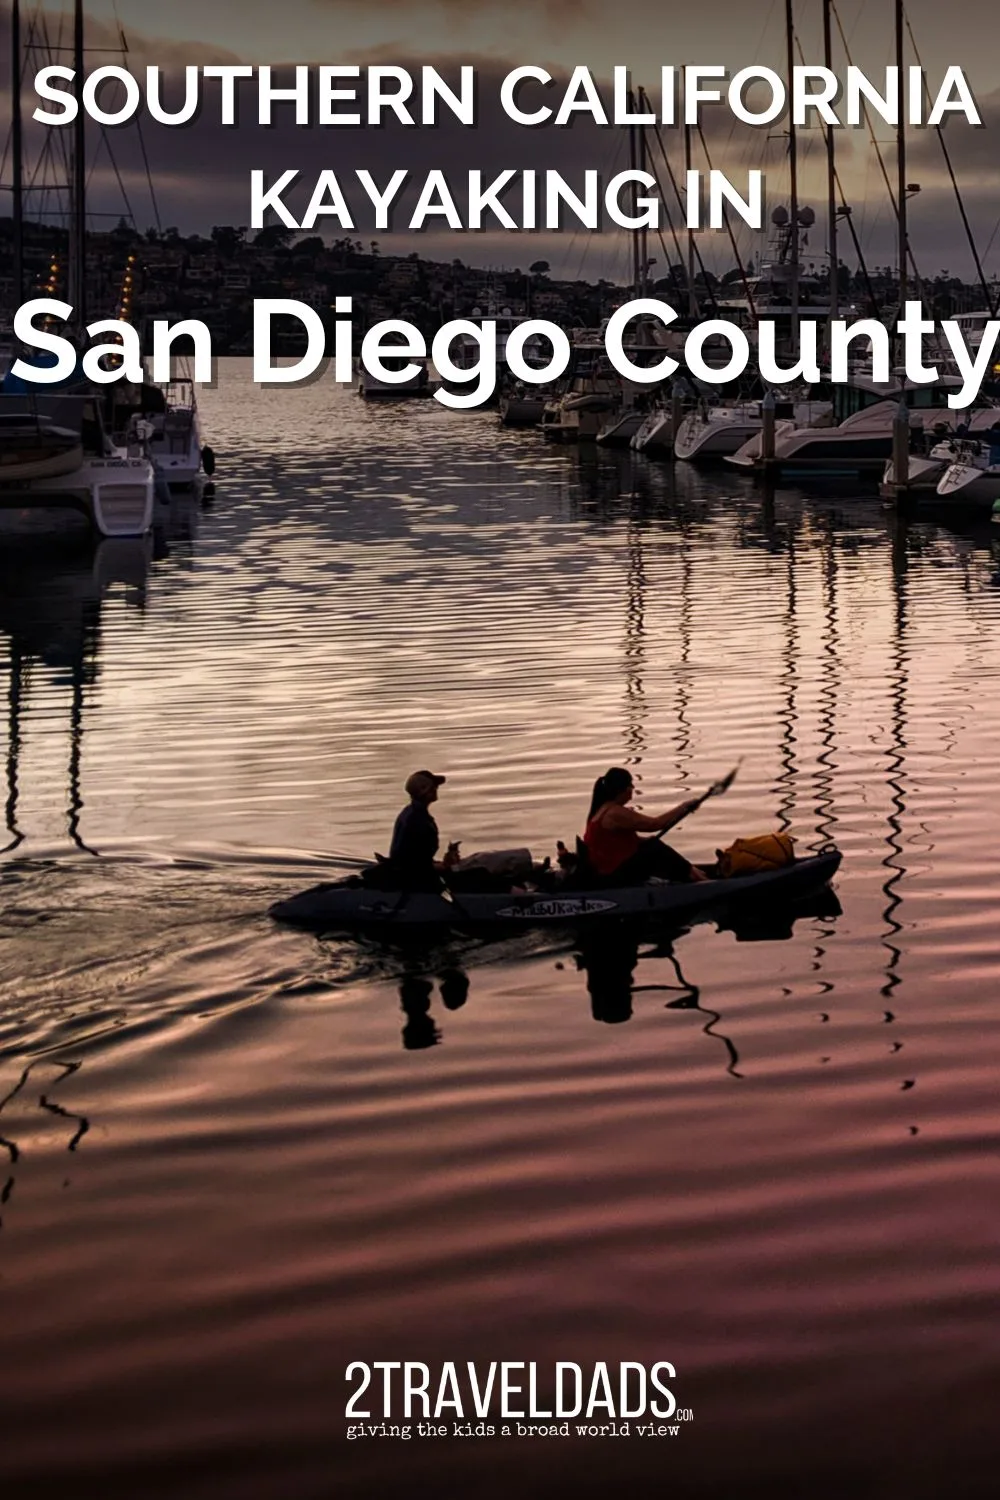 Kayaking in San Diego County is a fun addition to visiting Southern California. Check out our recommendations for sea kayaking in La Jolla, estuaries and more.